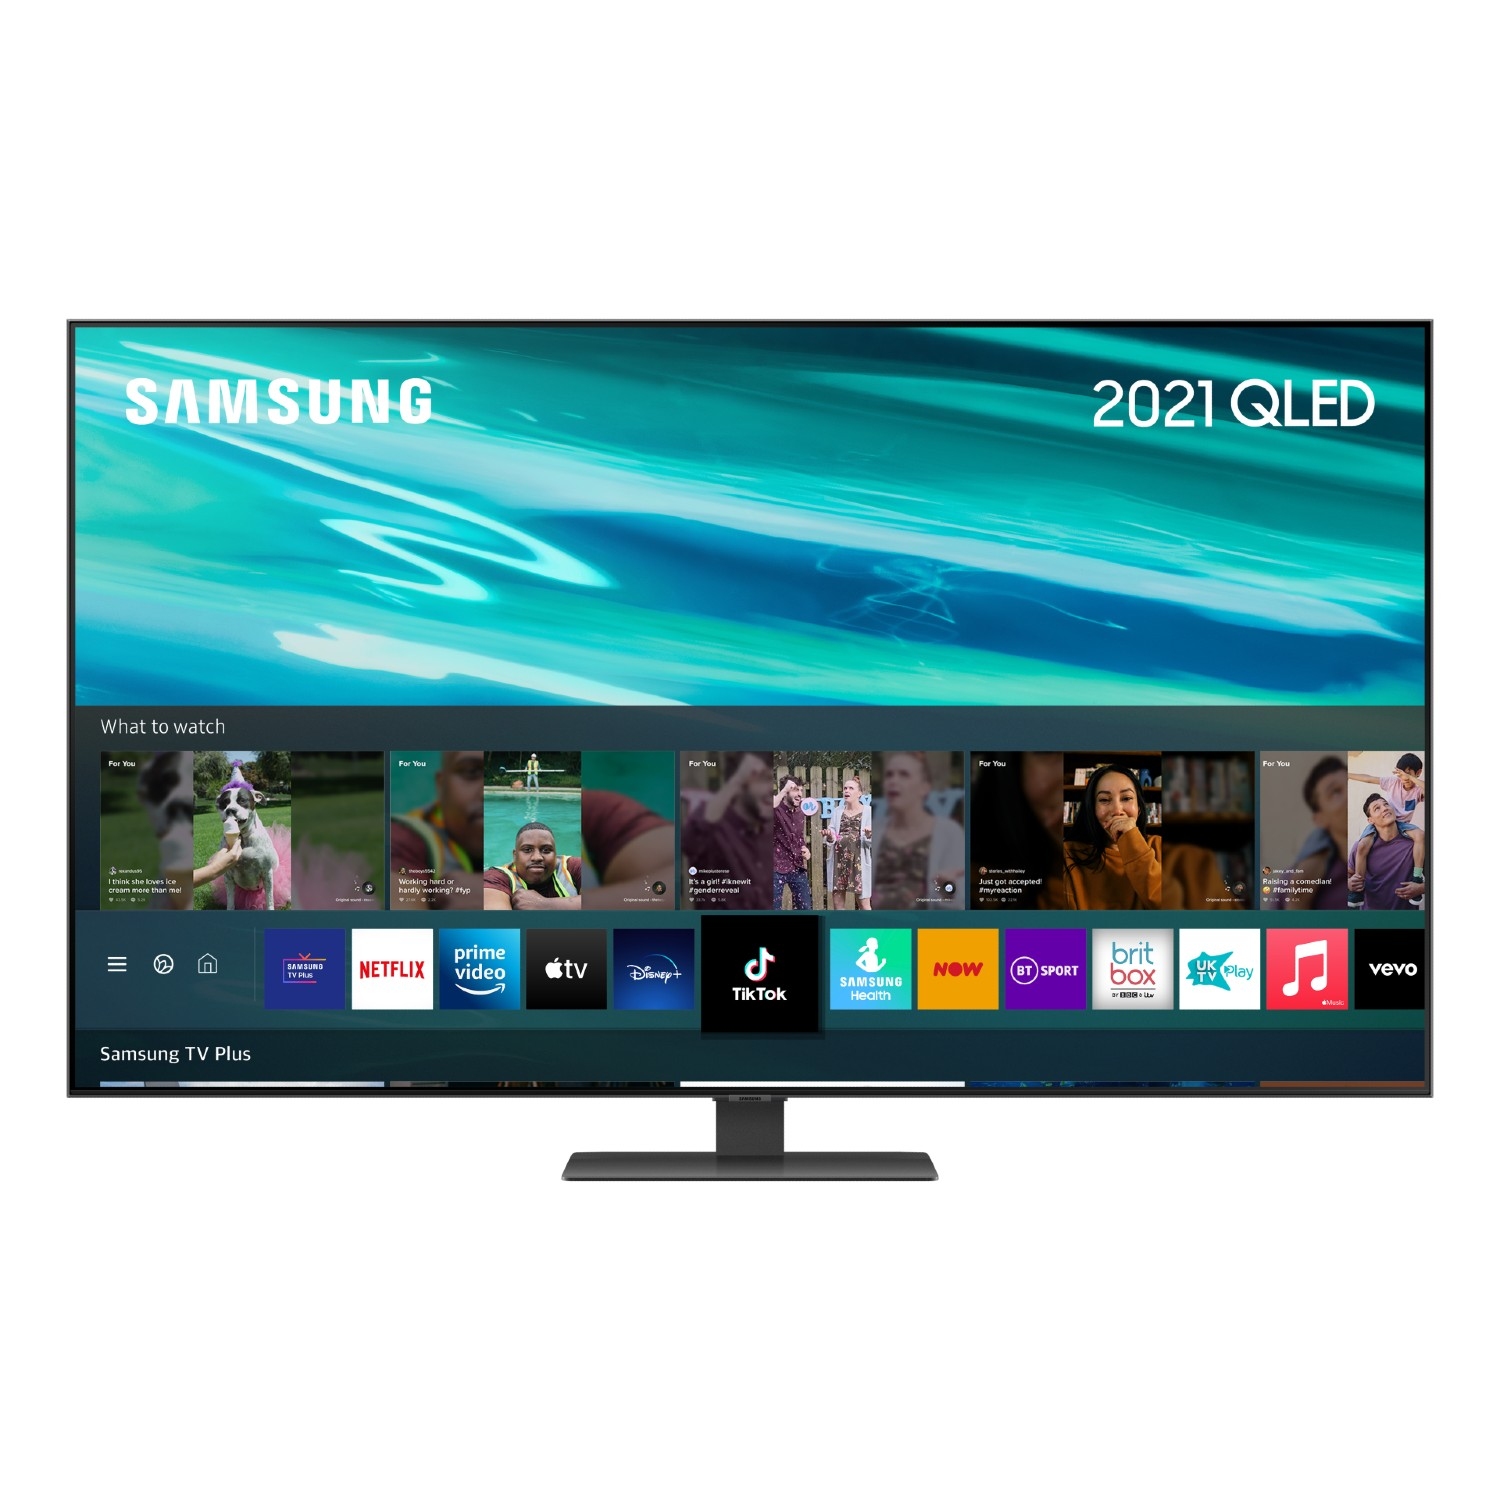 Samsung QE55Q80AATXXU 55" 4K QLED Smart TV Quantum HDR 1500 powered by HDR10+ with object tracking and AI sound - 0